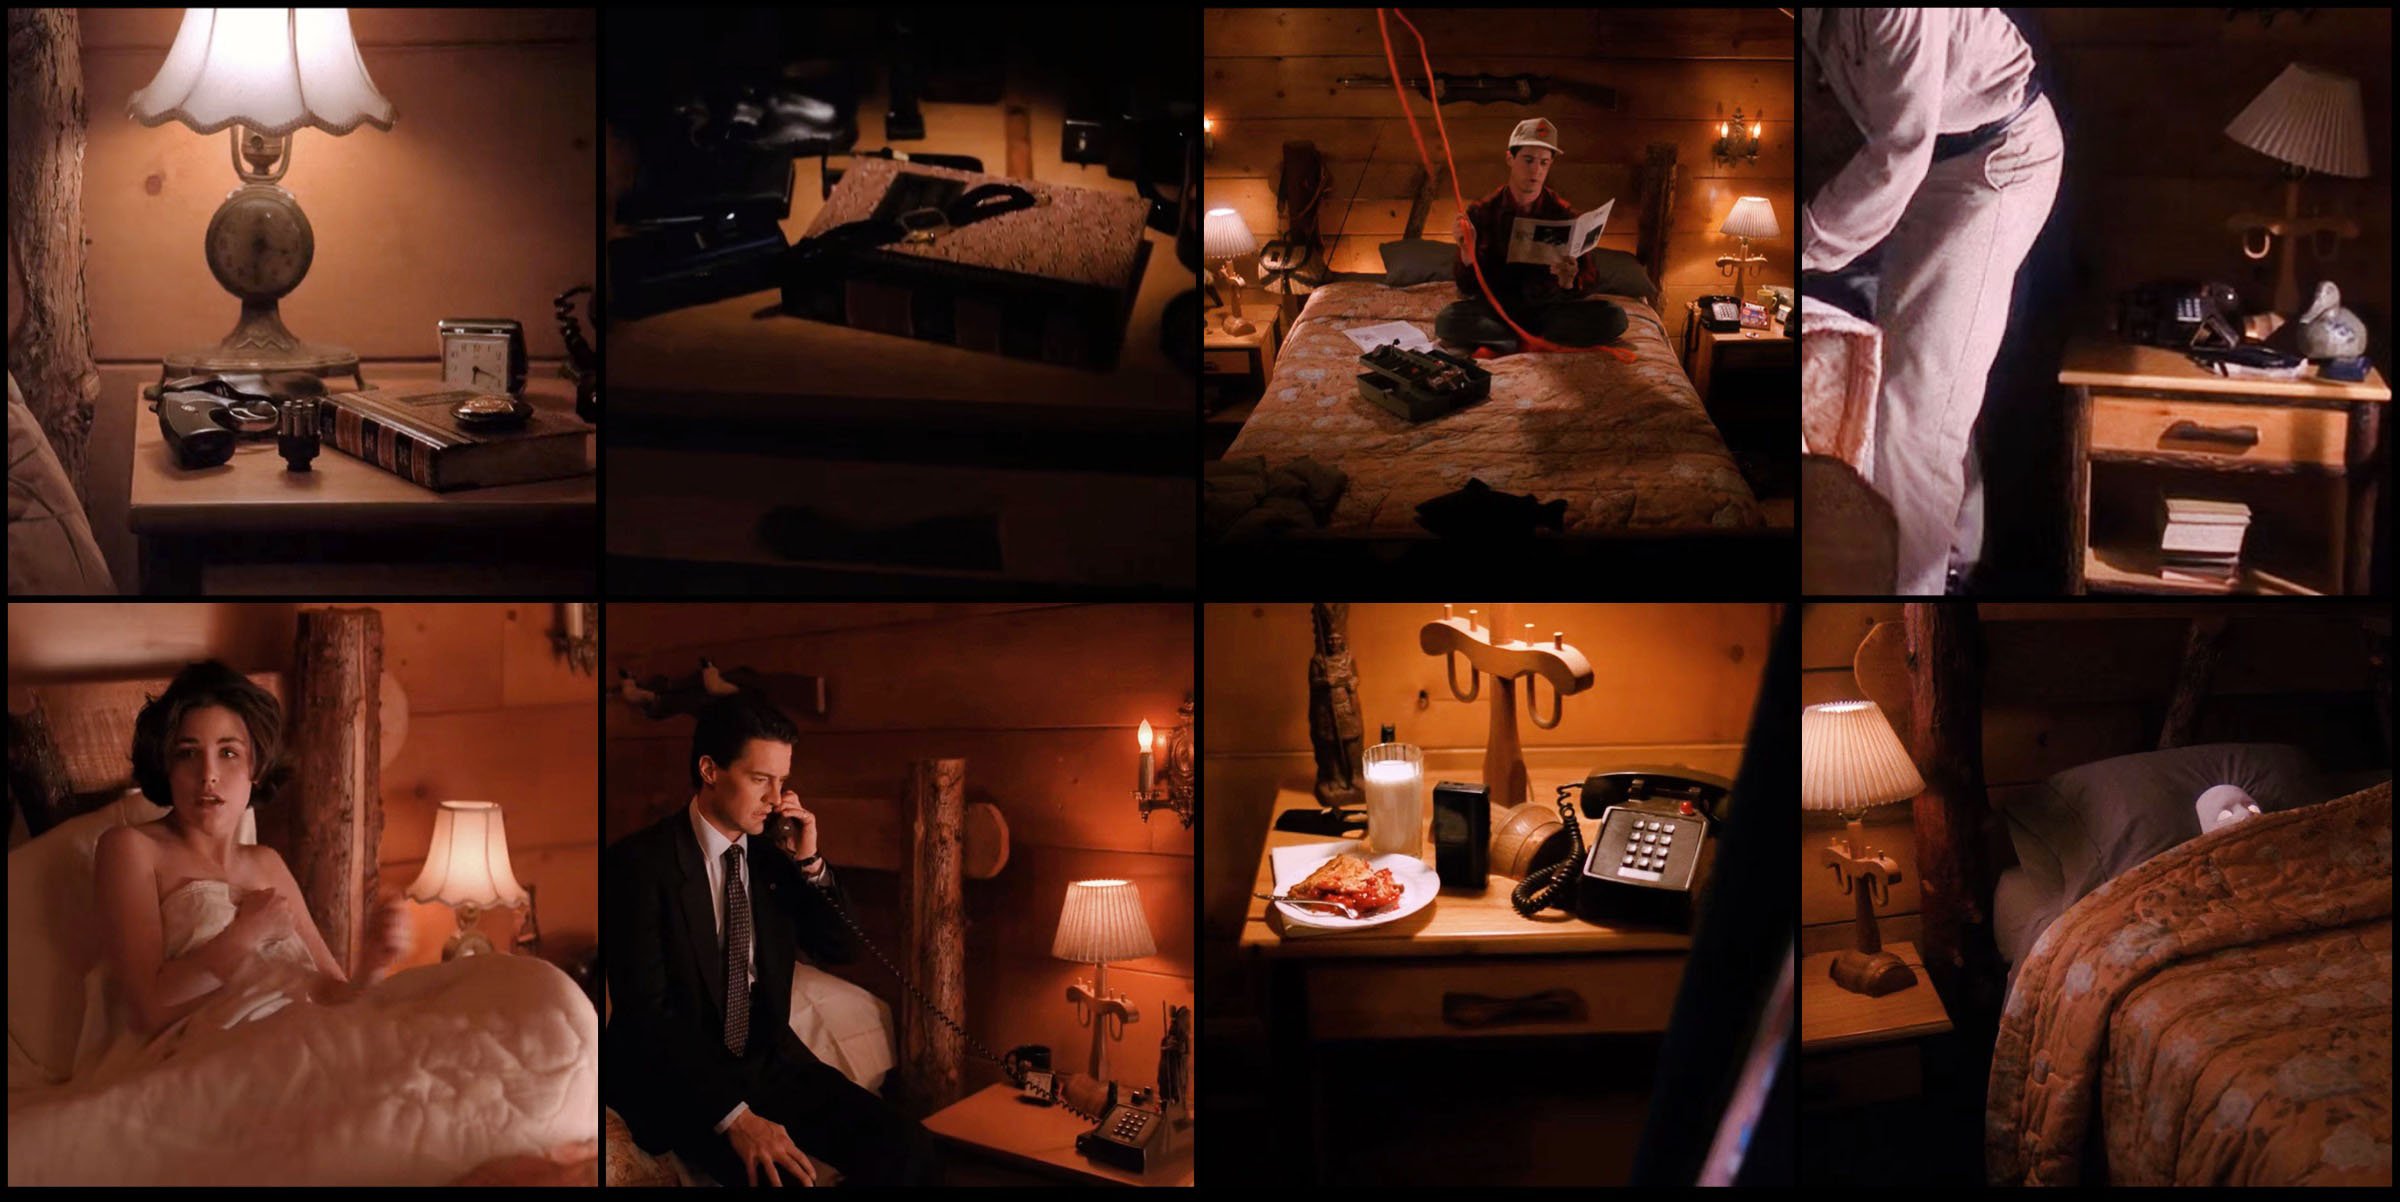 Collage of images from Dale Cooper's hotel room